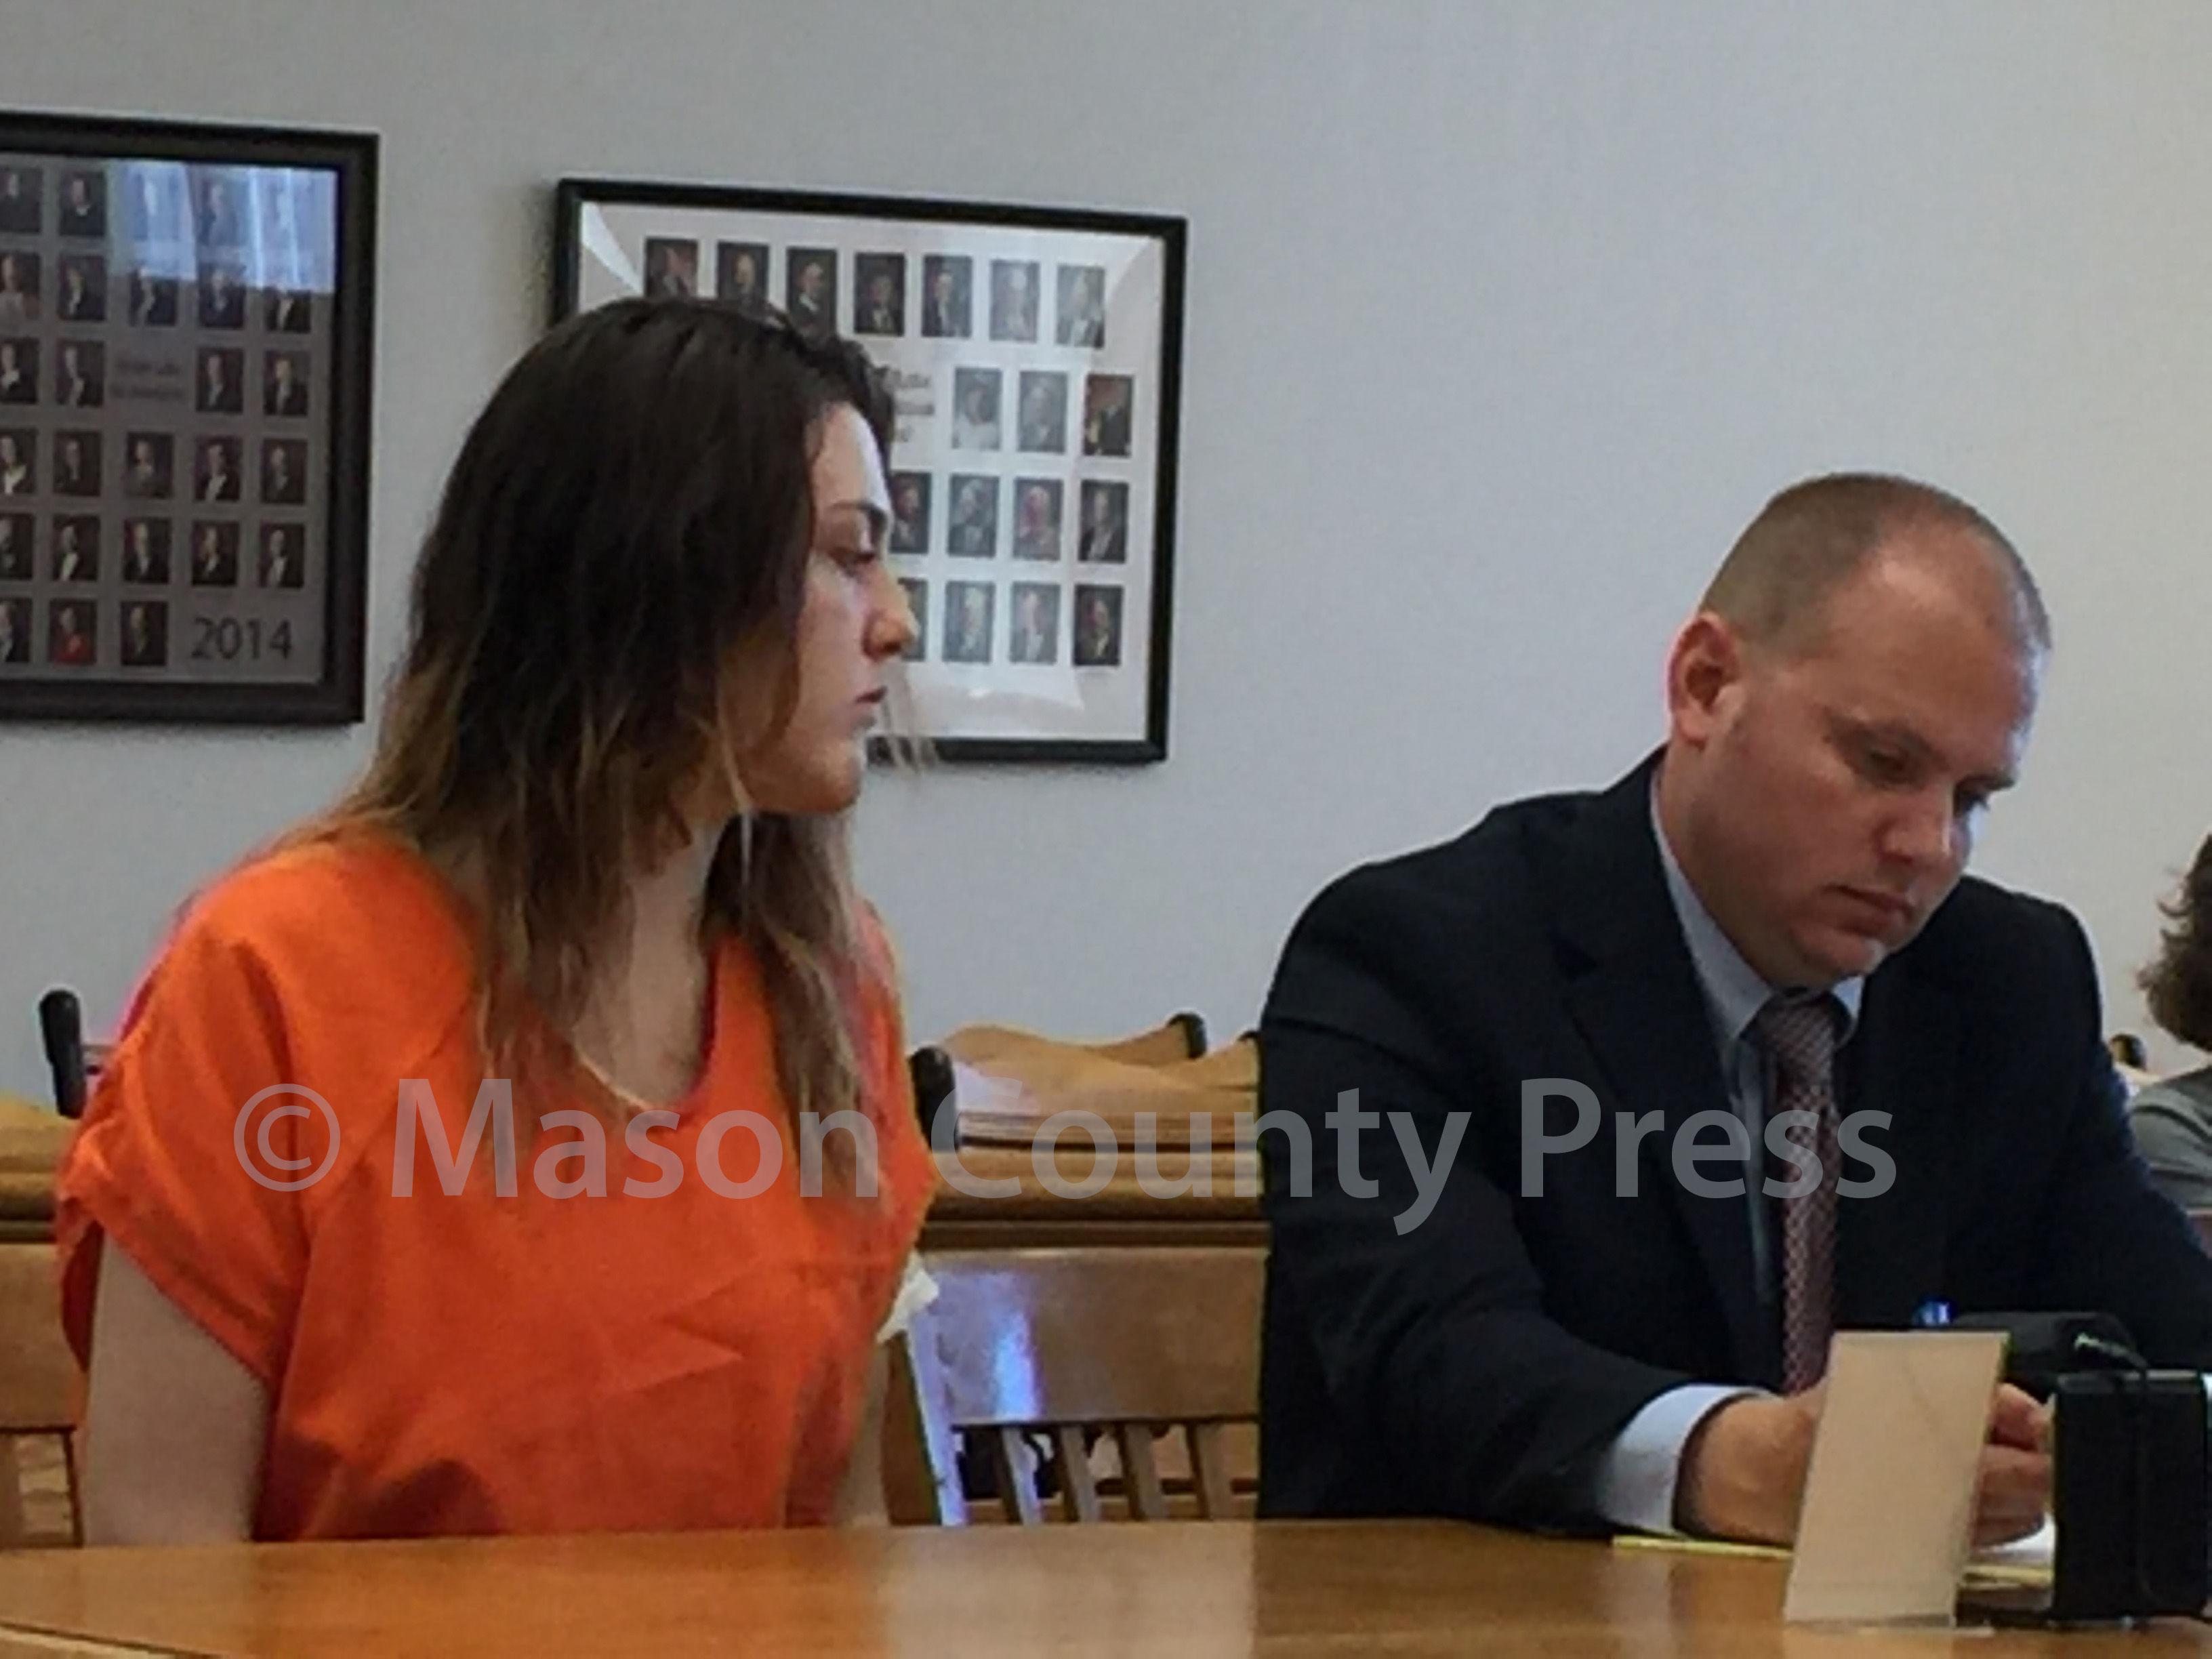 Homeless woman pleads guilty to resisting police. | MasonCountyPress.com